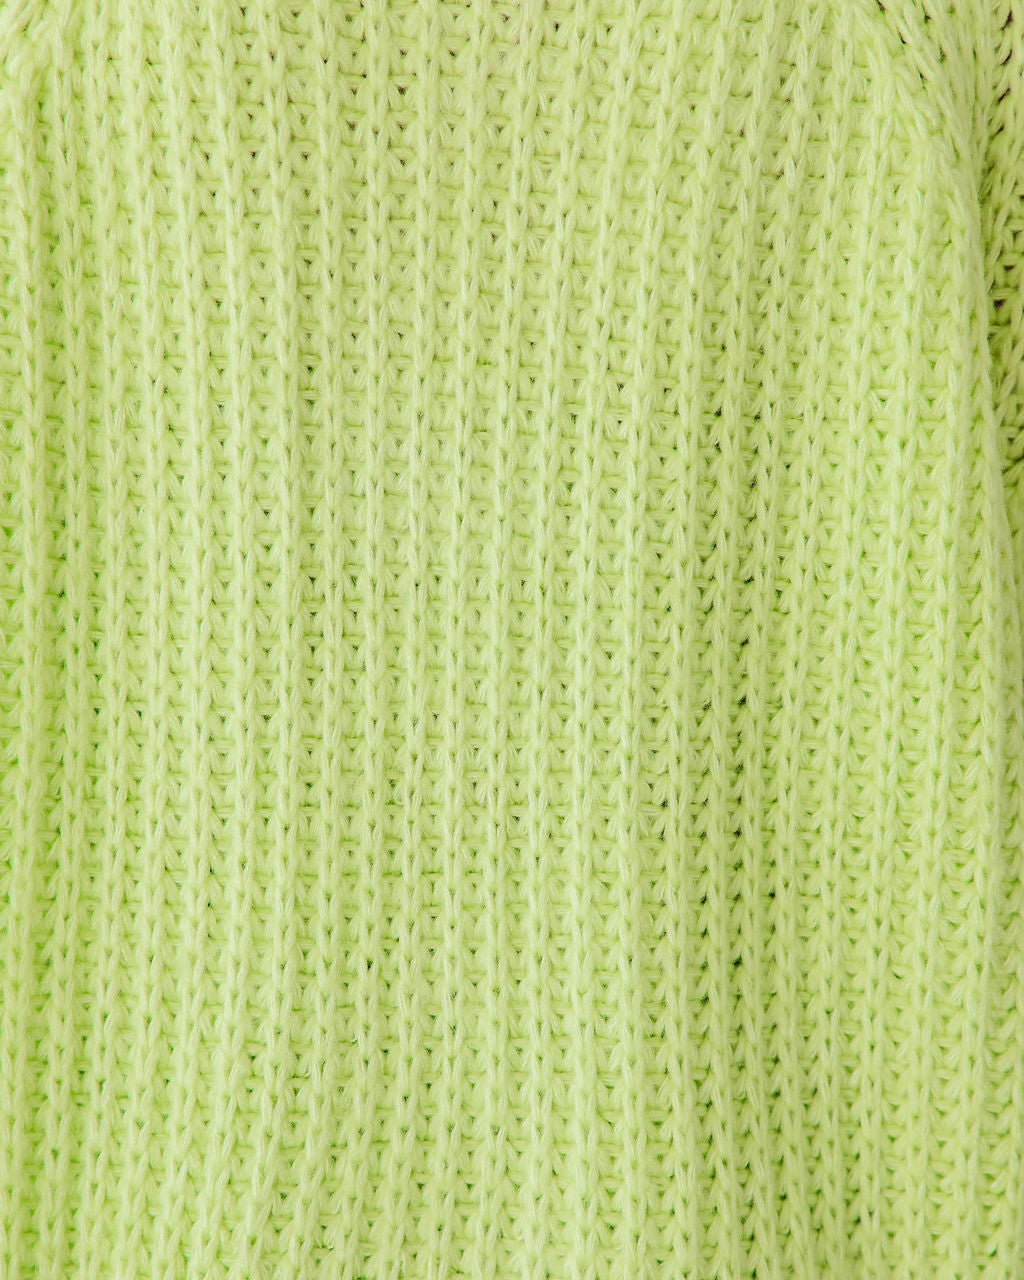 Claudine Knit Cardigan - Lime Green